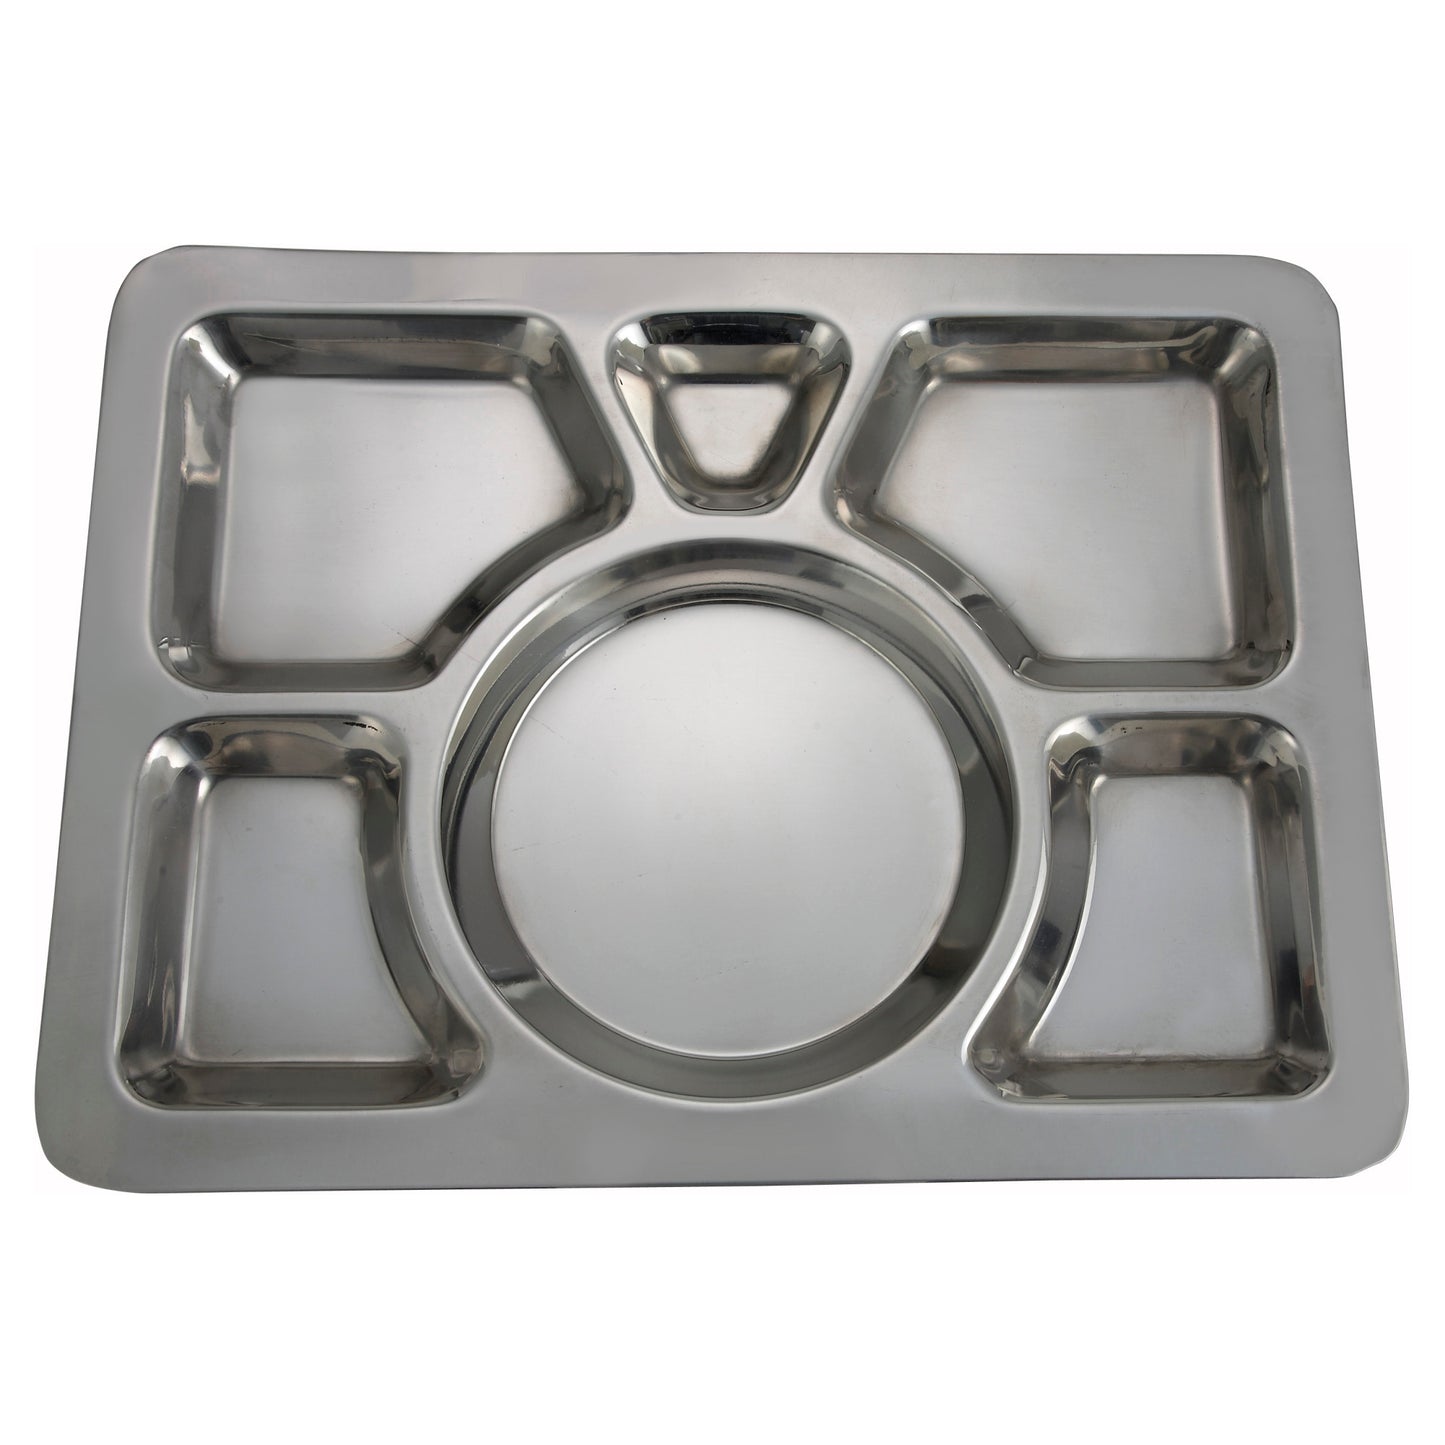 SMT-1 - Stainless Steel 6 Compartment Mess Trays - A